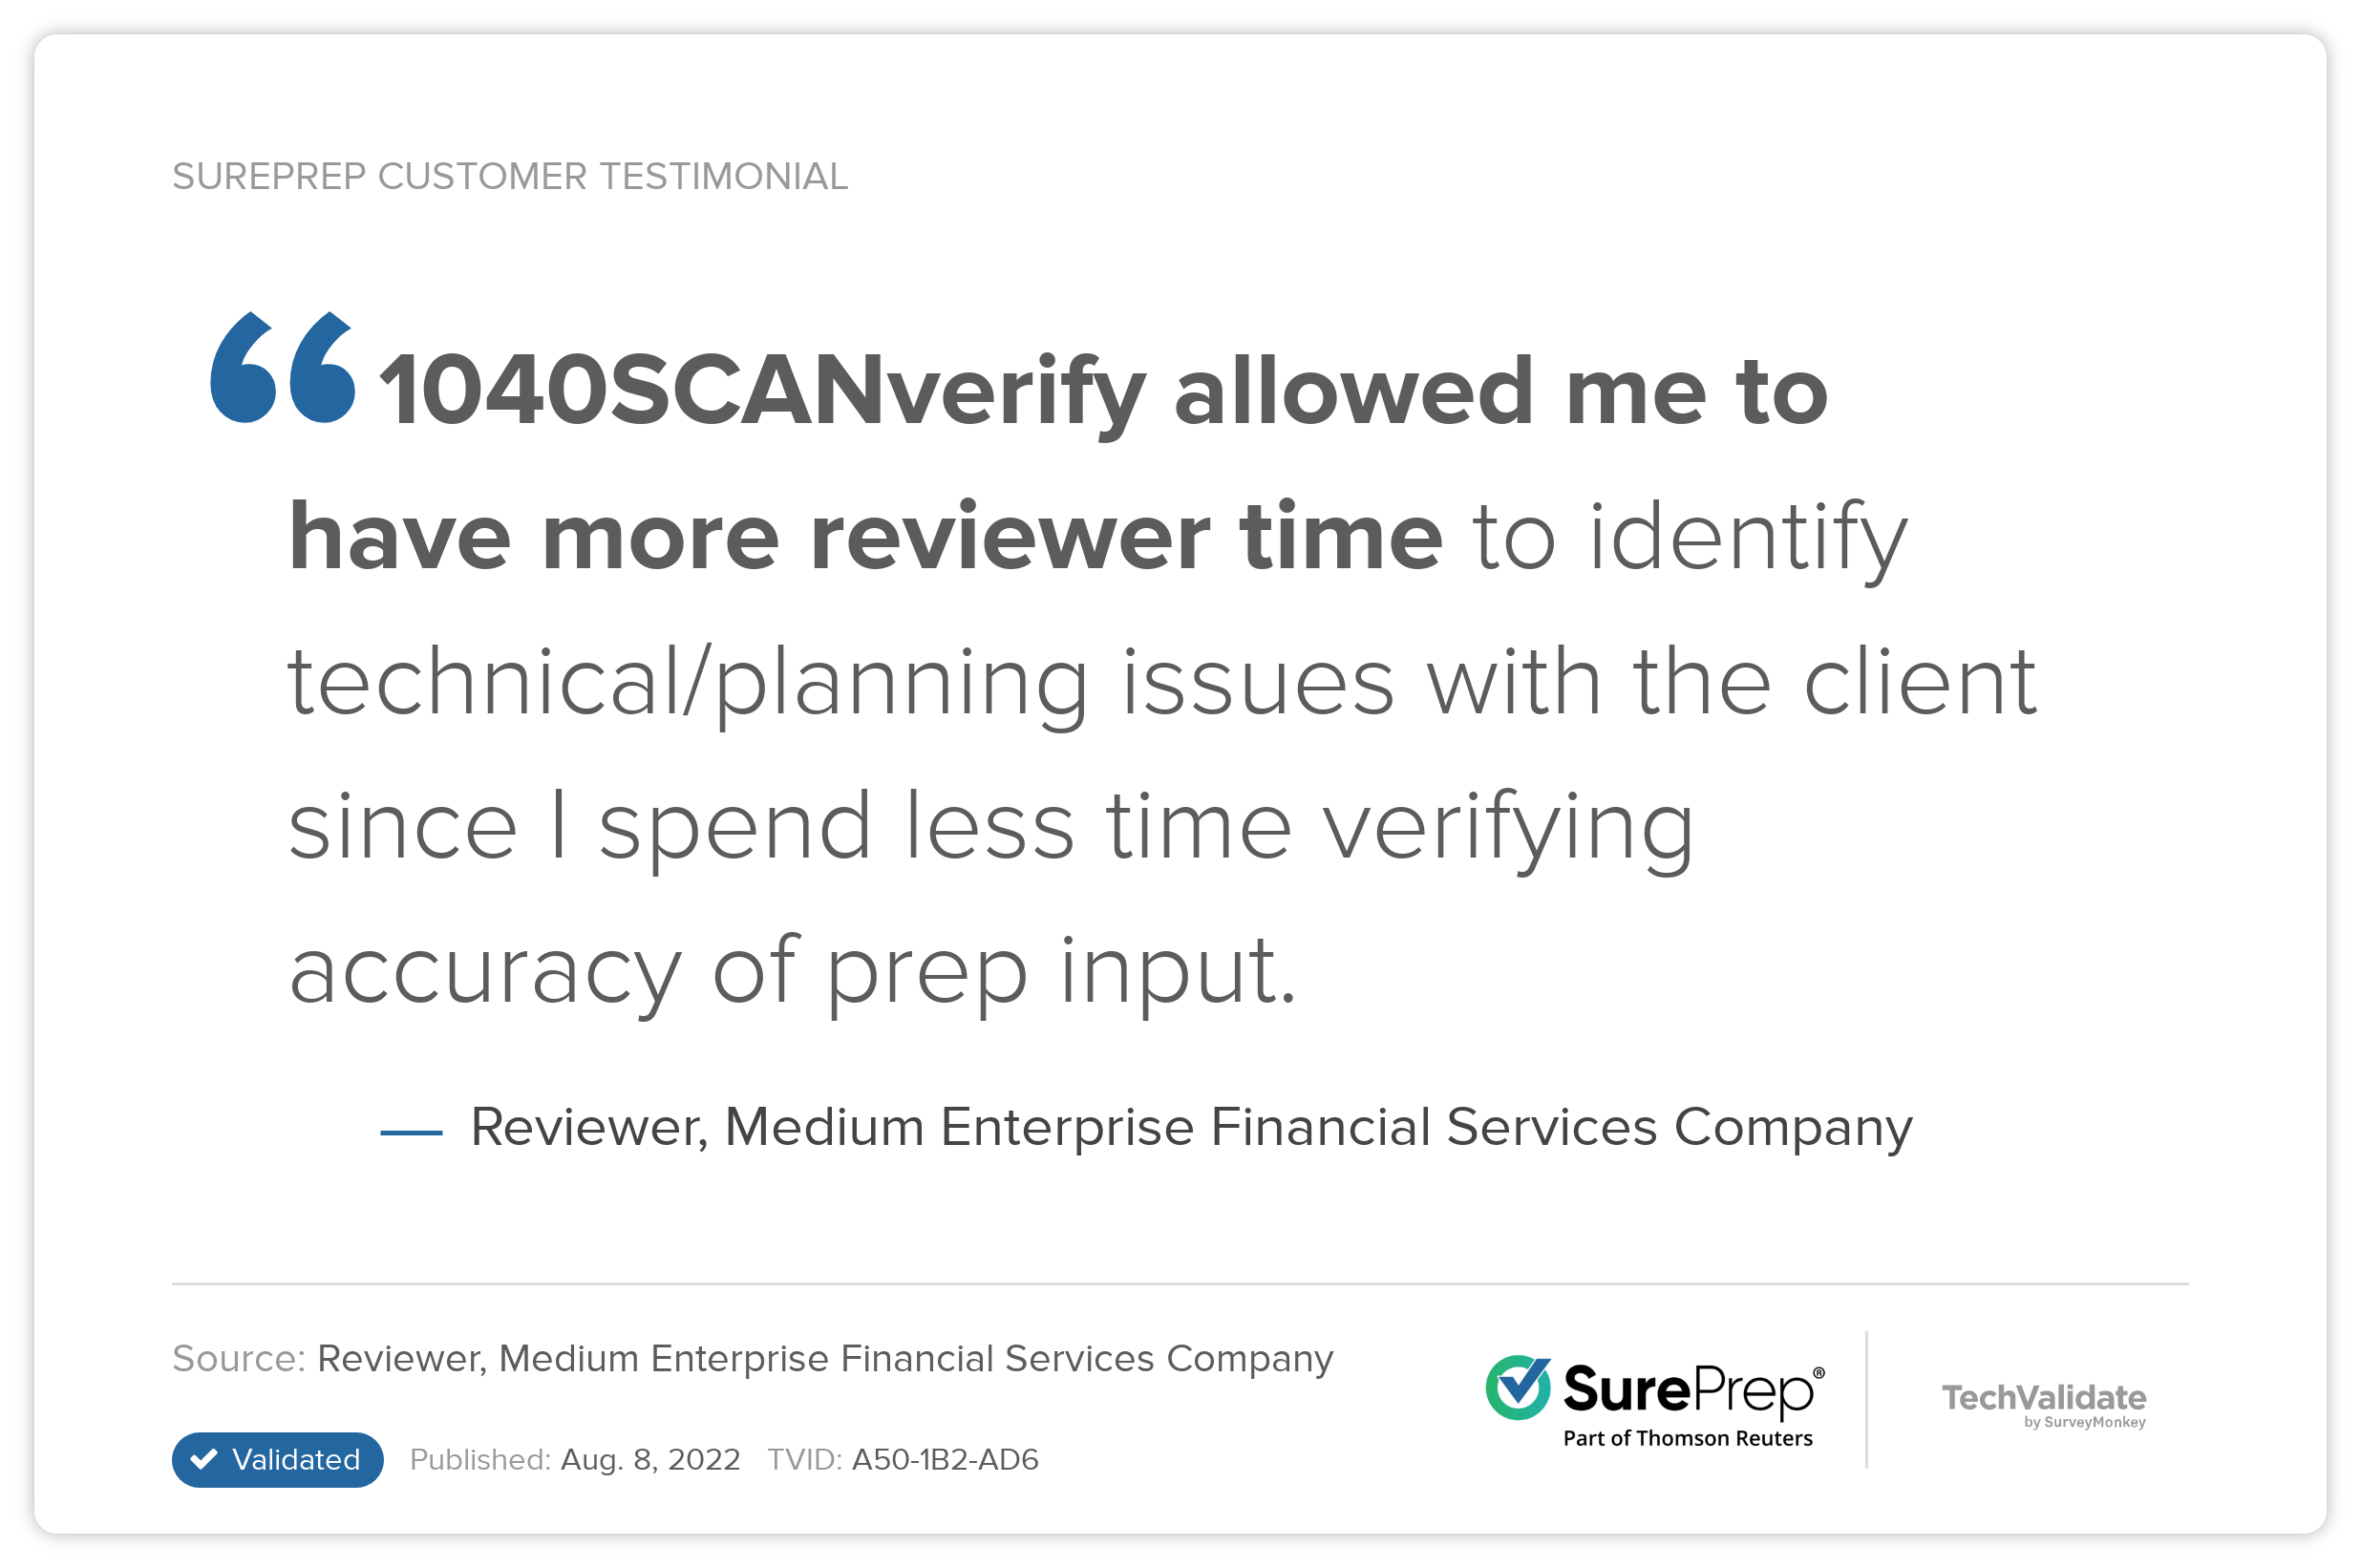 "1040SCANverify allowed me to have more reviewer time to identify technical/planning issues with the client since I spend less time verifying accuracy of prep input." - Reviewer, Medium Enterprise Financial Services Company